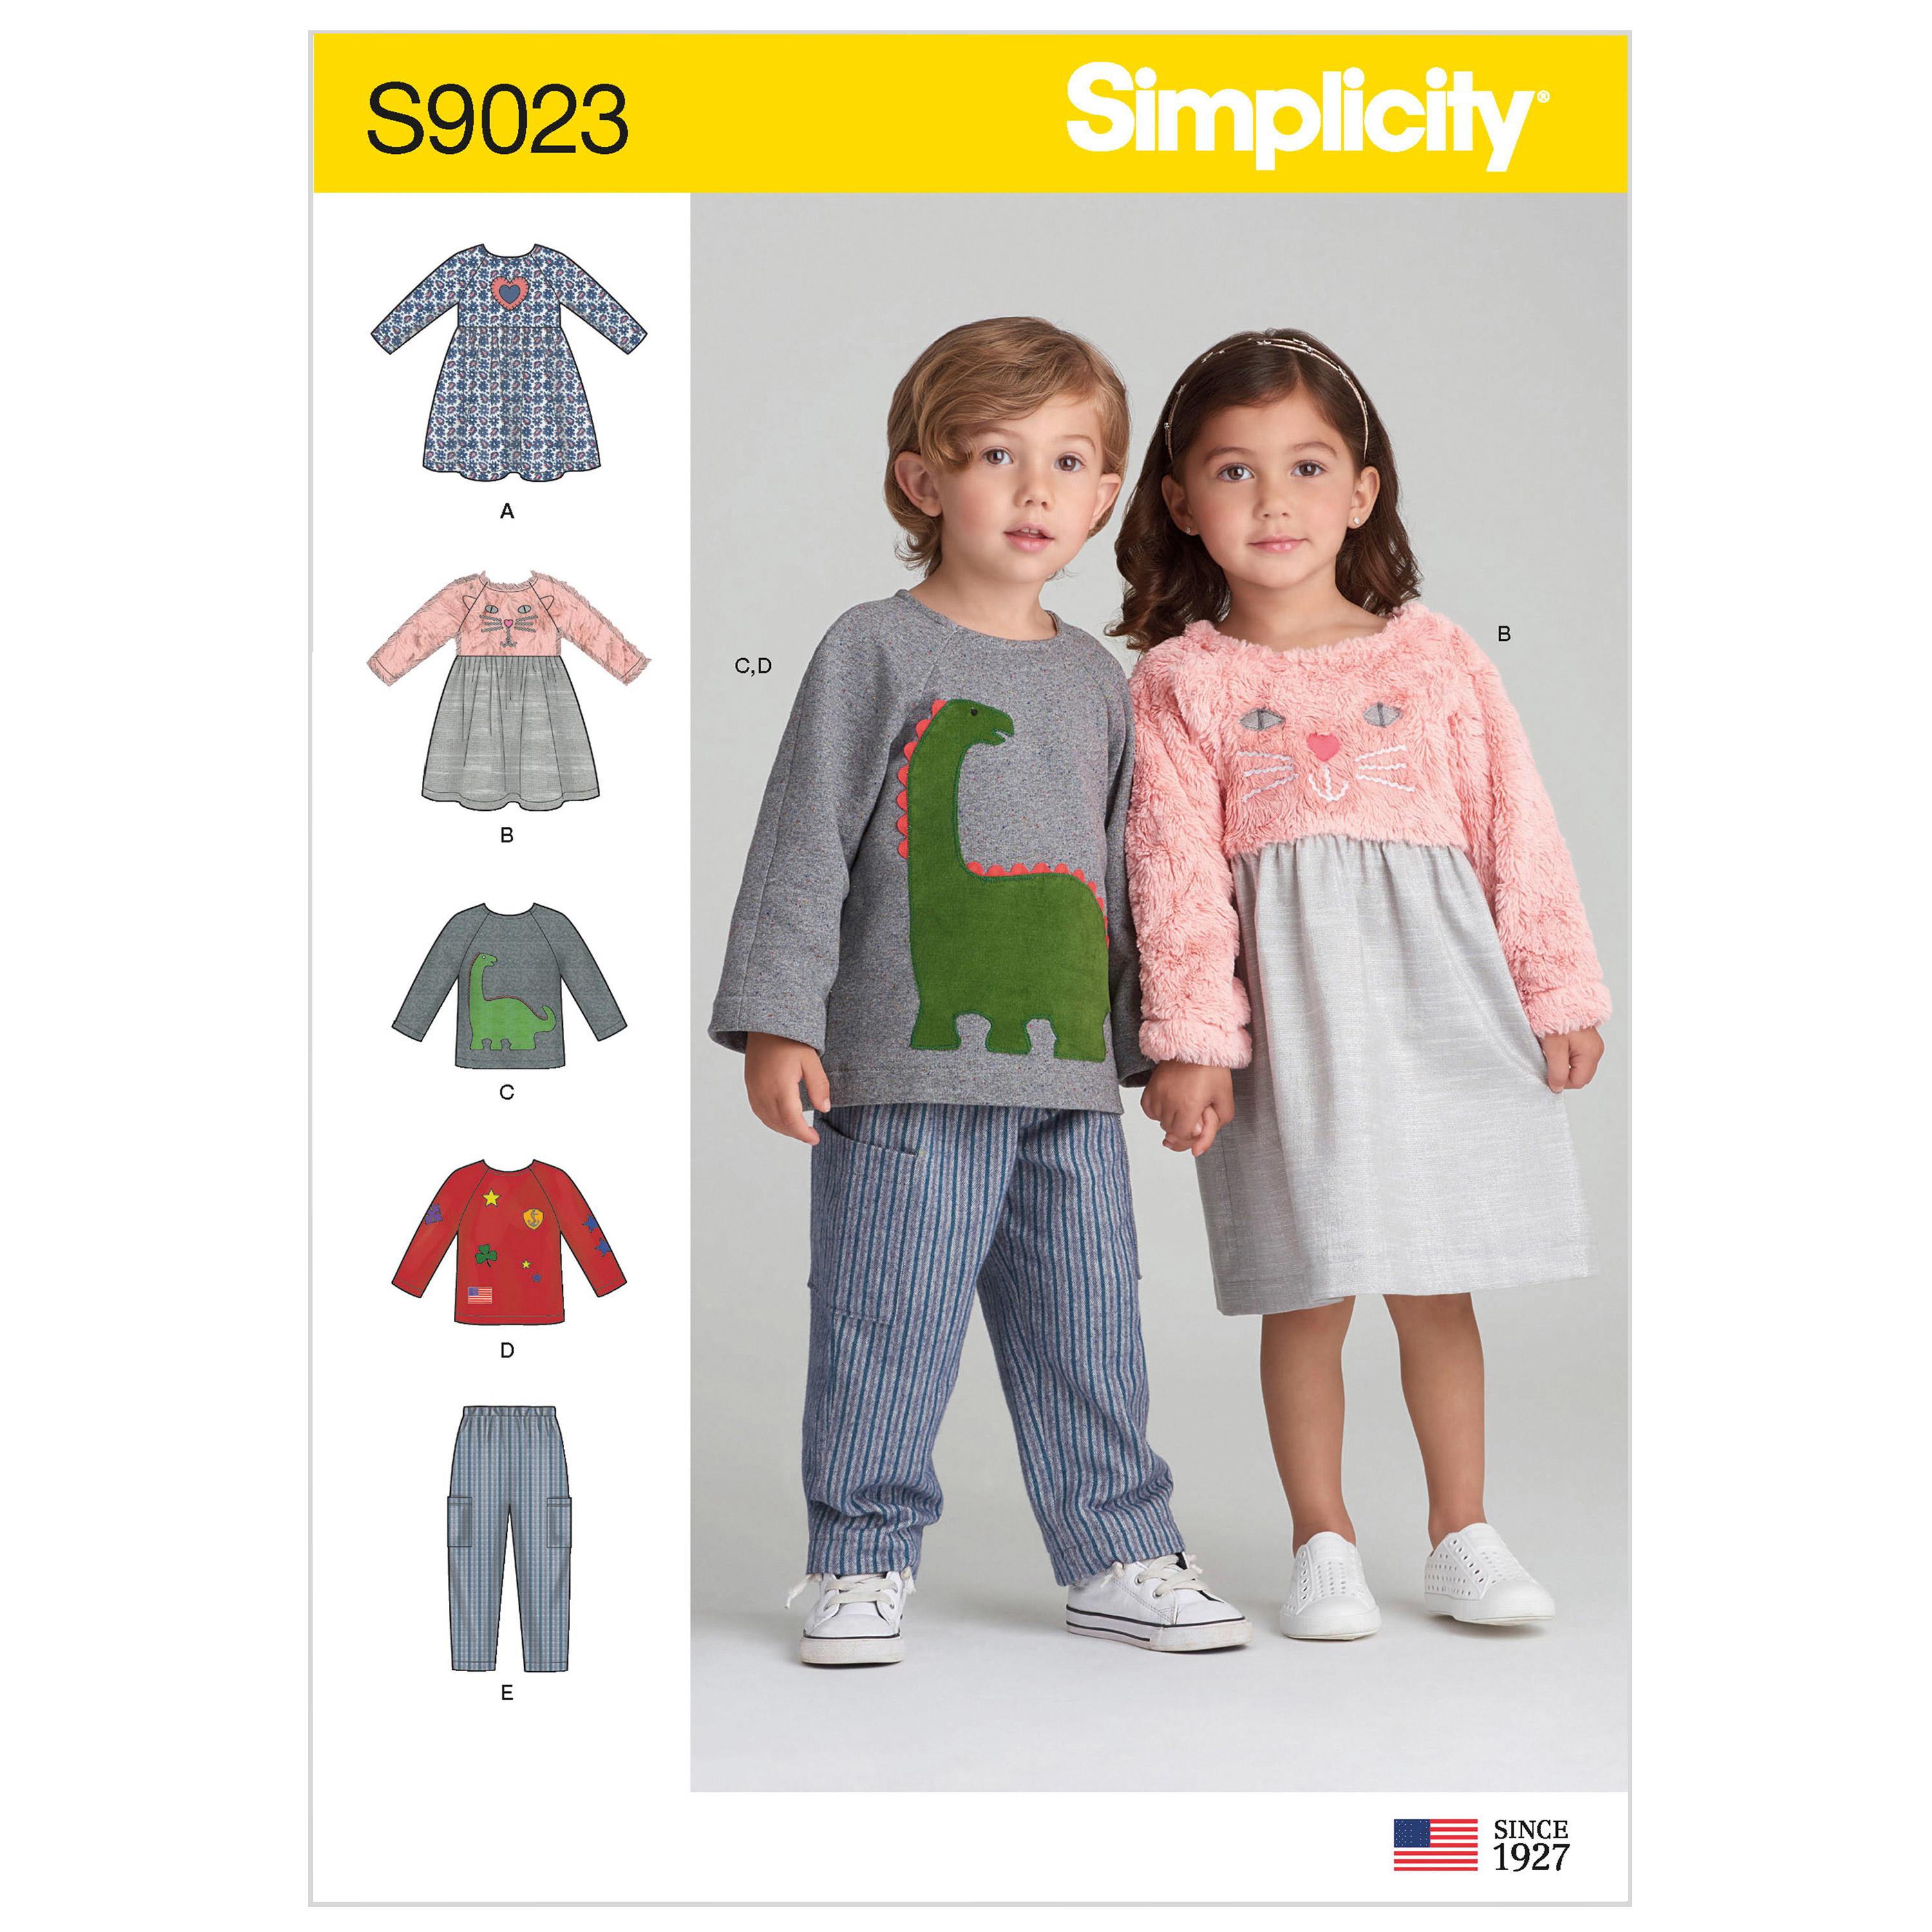 Simplicity S9023 Toddlers' Dresses, Top & Pants